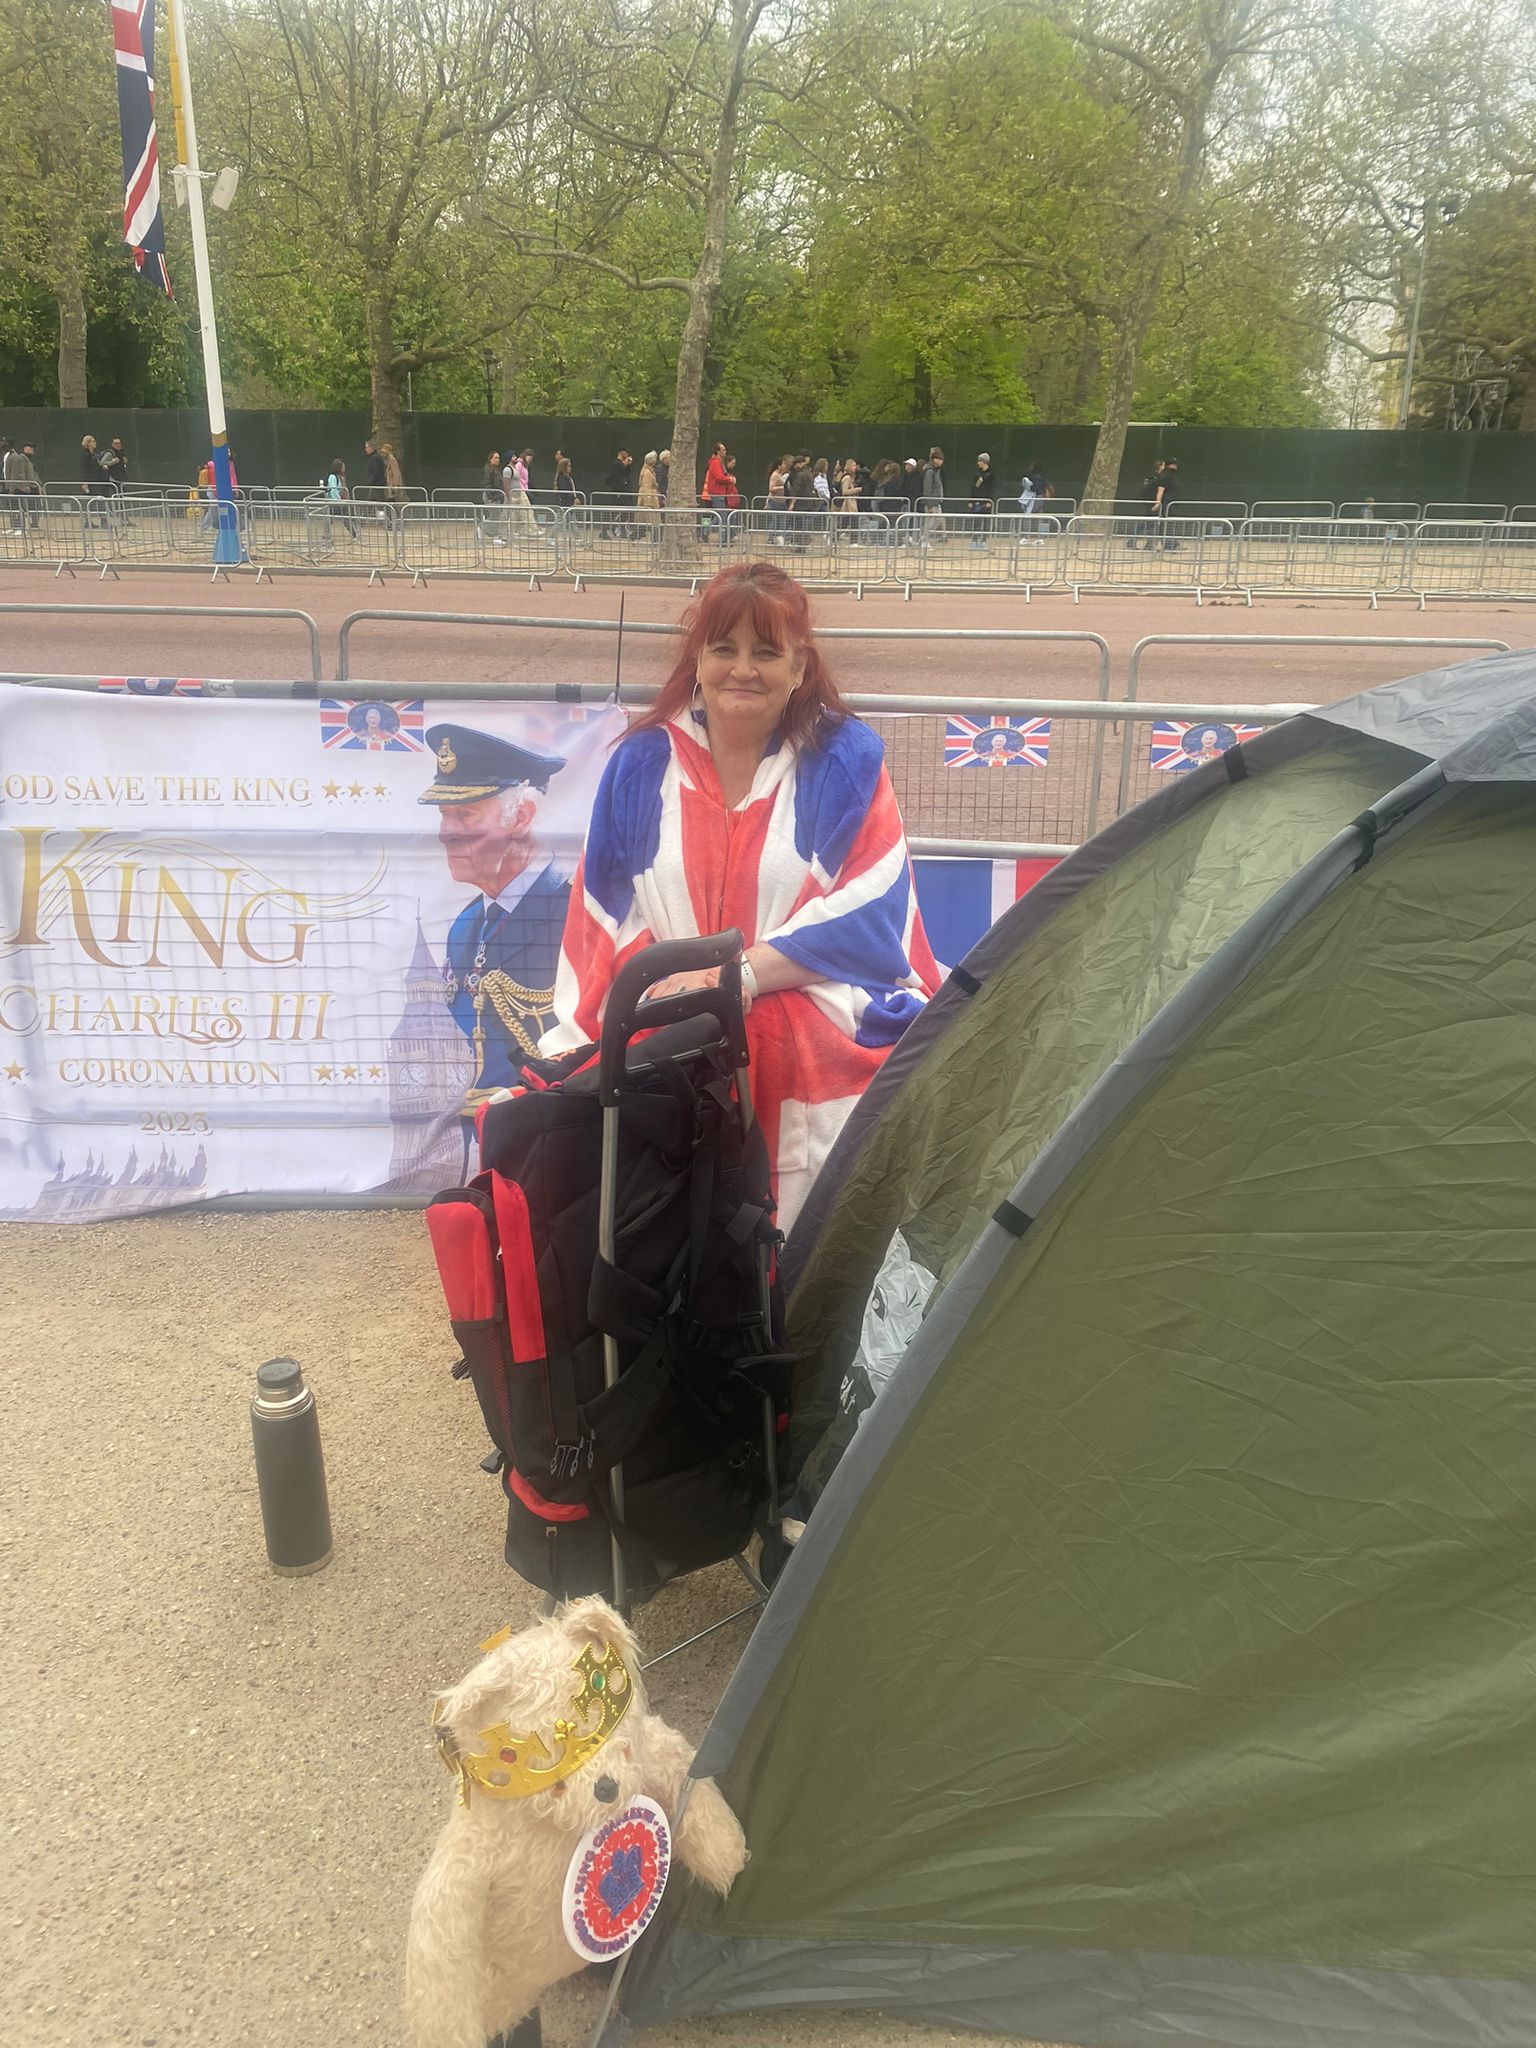 Faith Nicholson from Althorne, Essex said she has always been a fan of King Charles